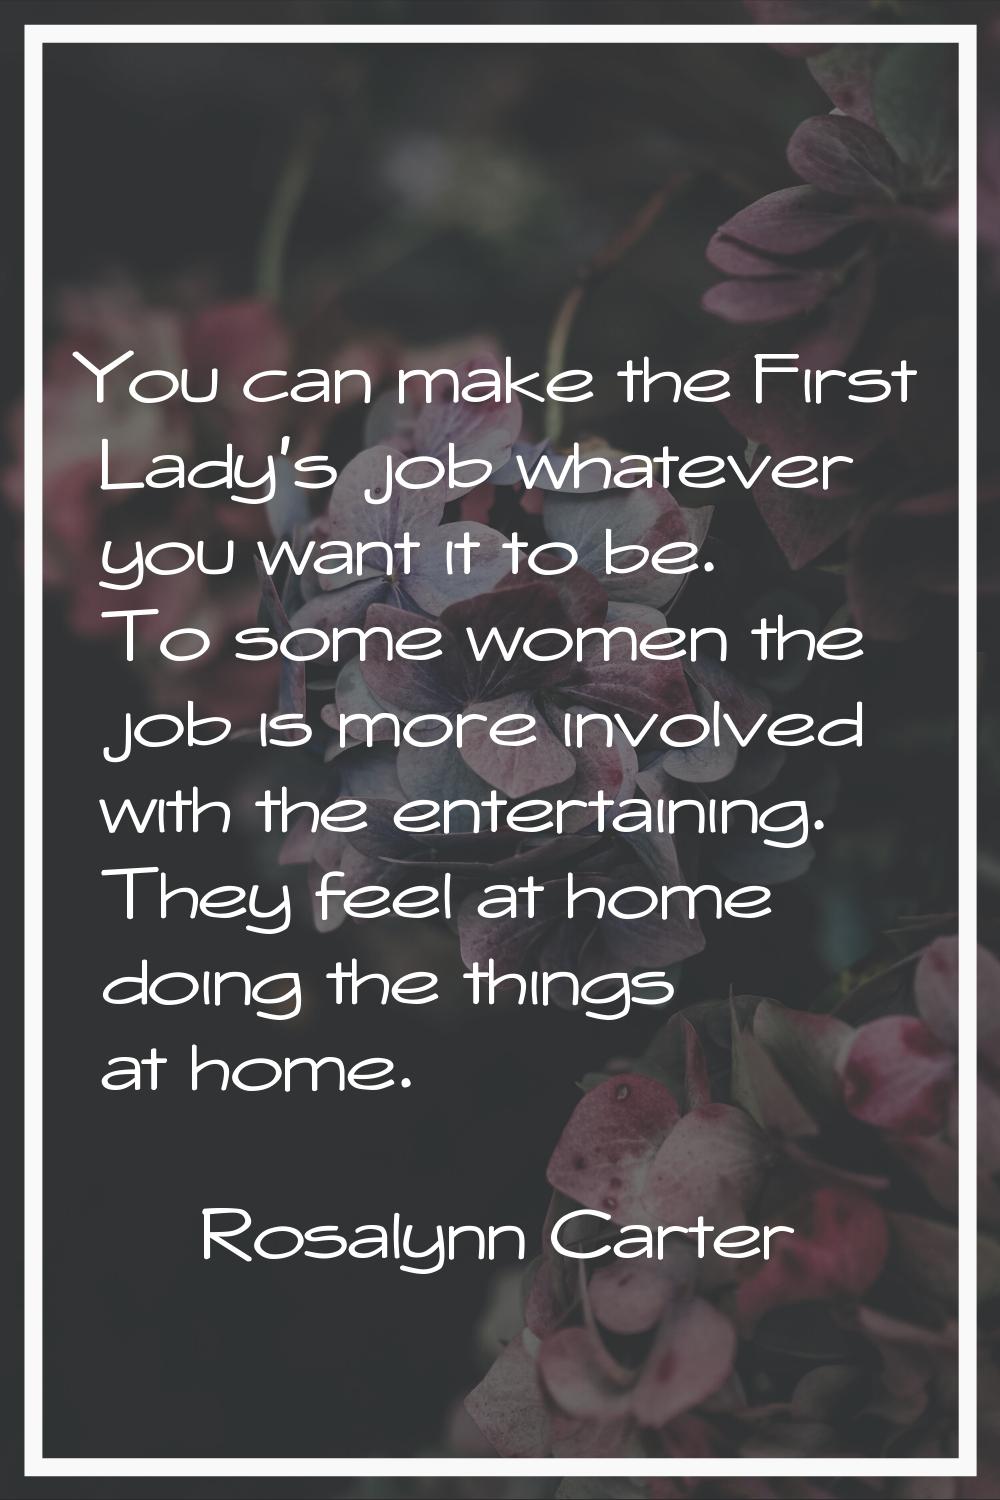 You can make the First Lady's job whatever you want it to be. To some women the job is more involve